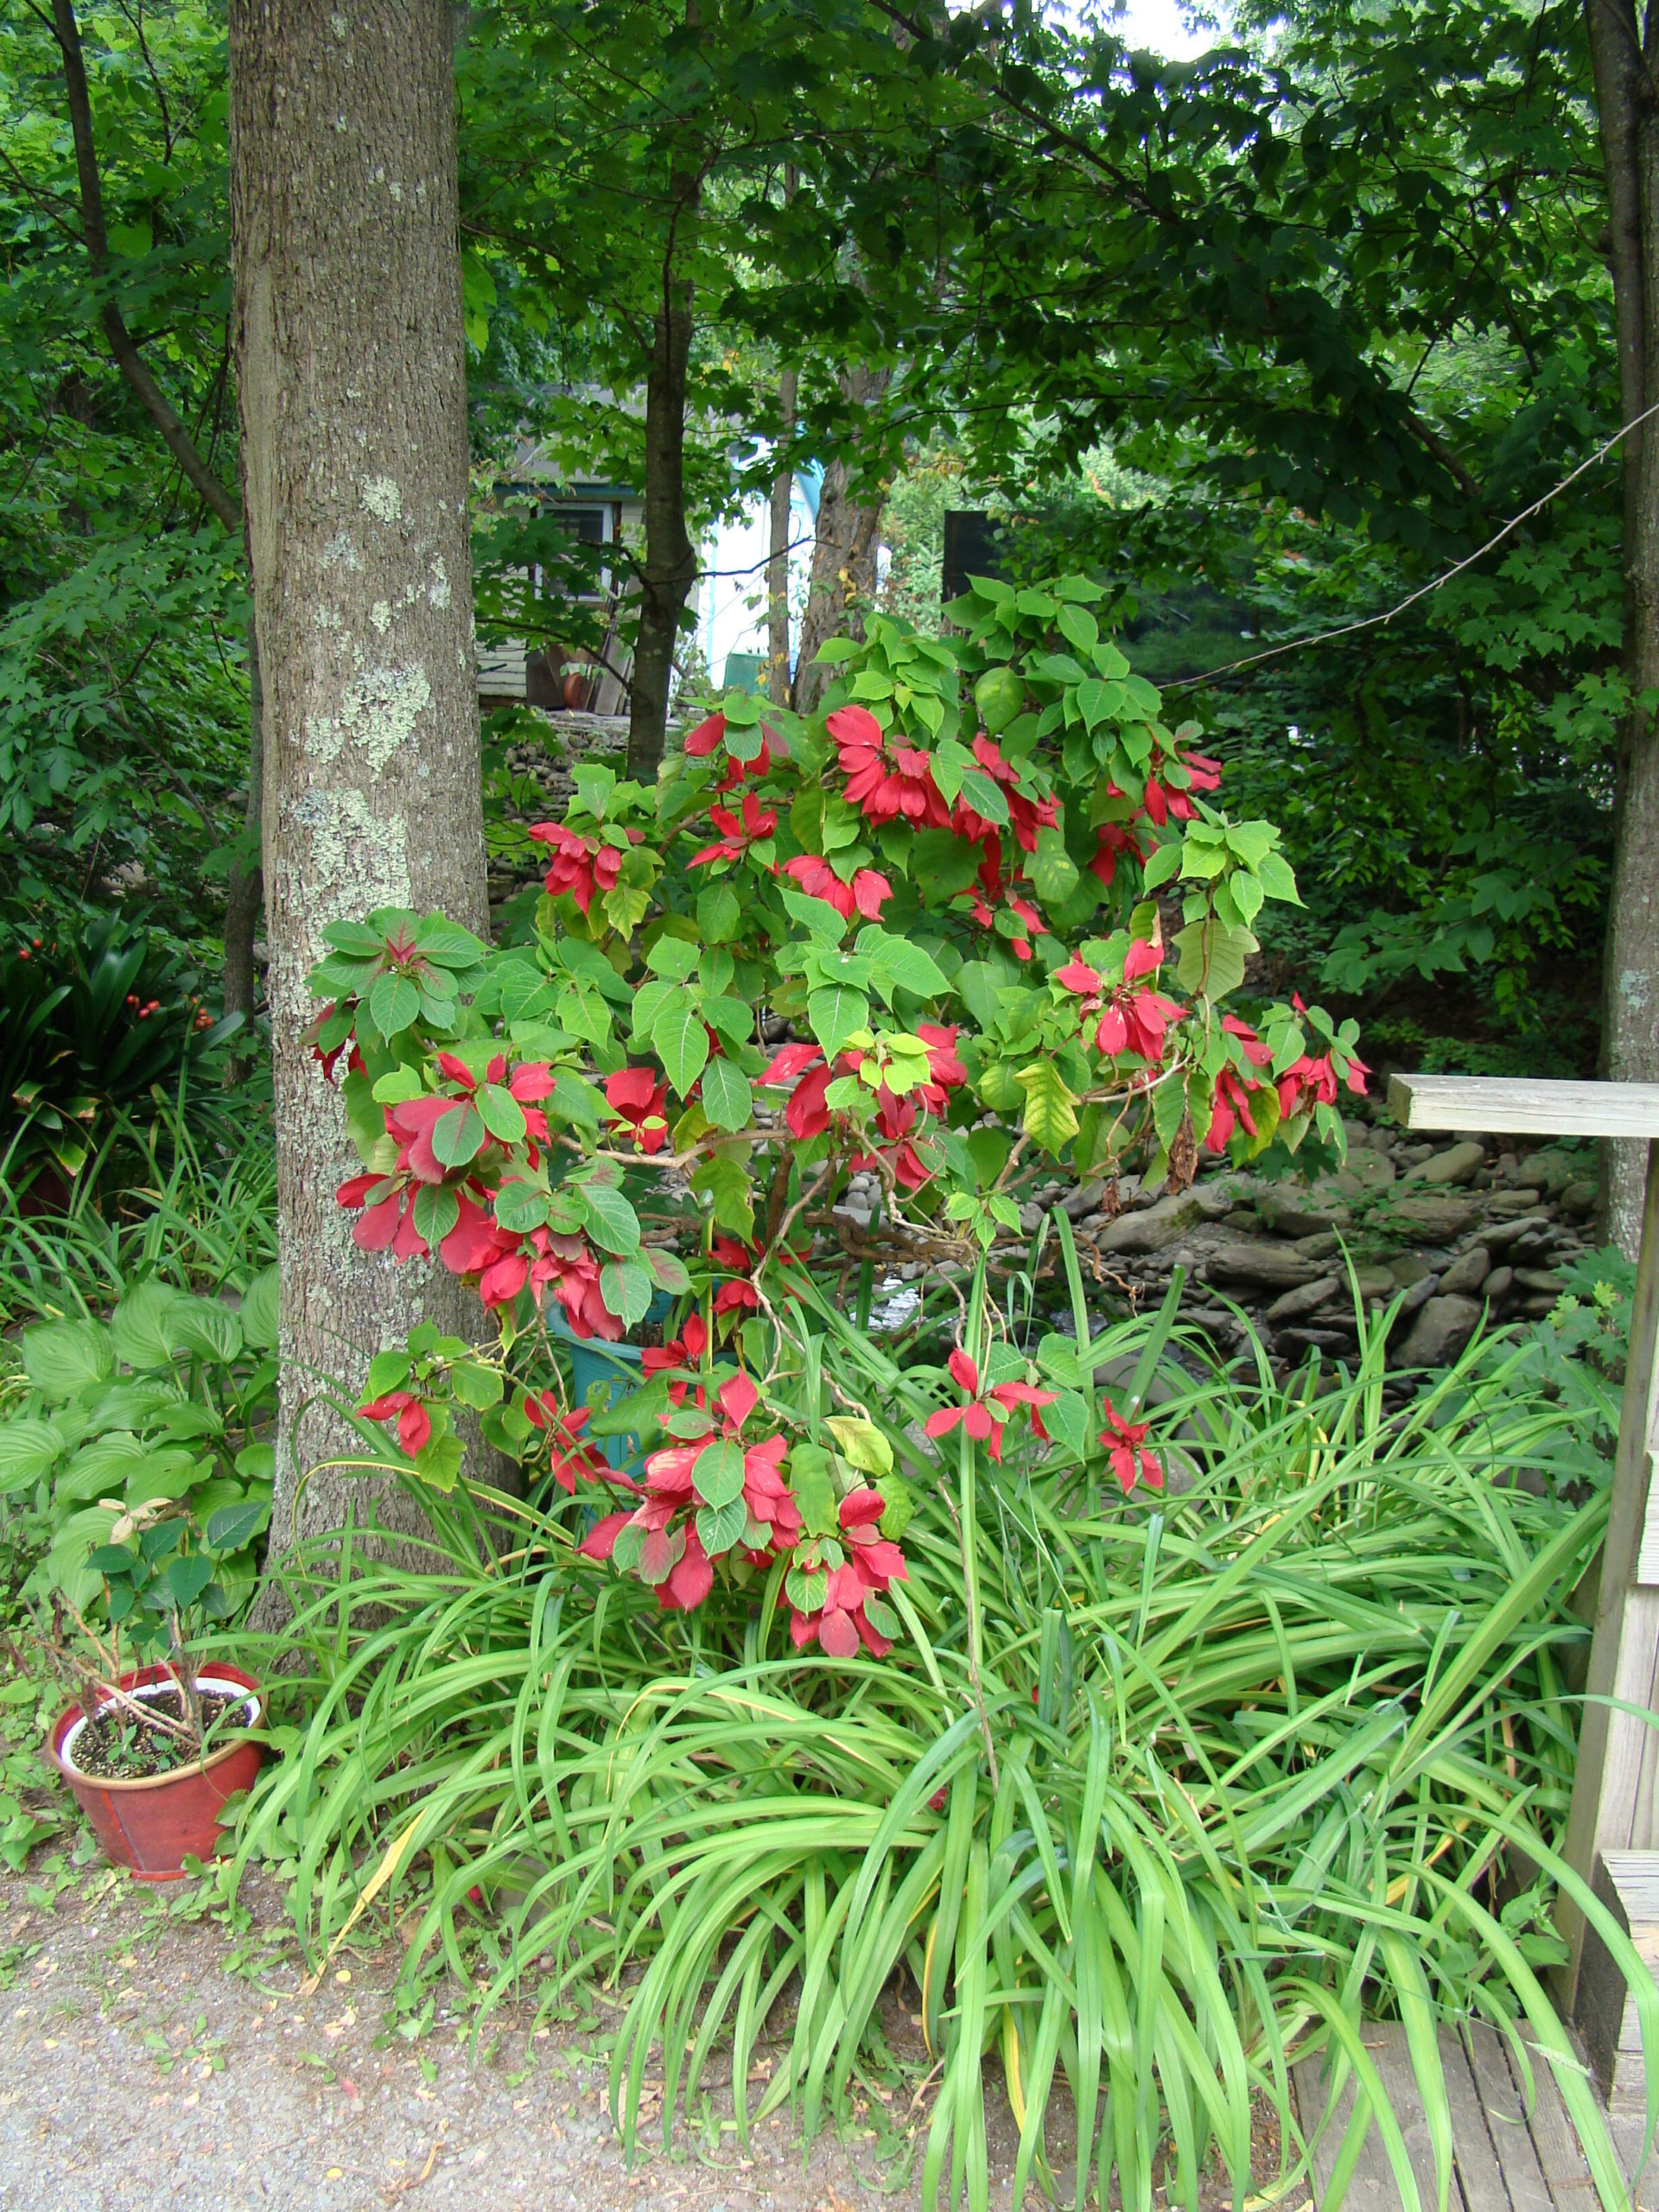 Poinsettias in a local garden in July. This plant would not be a good 